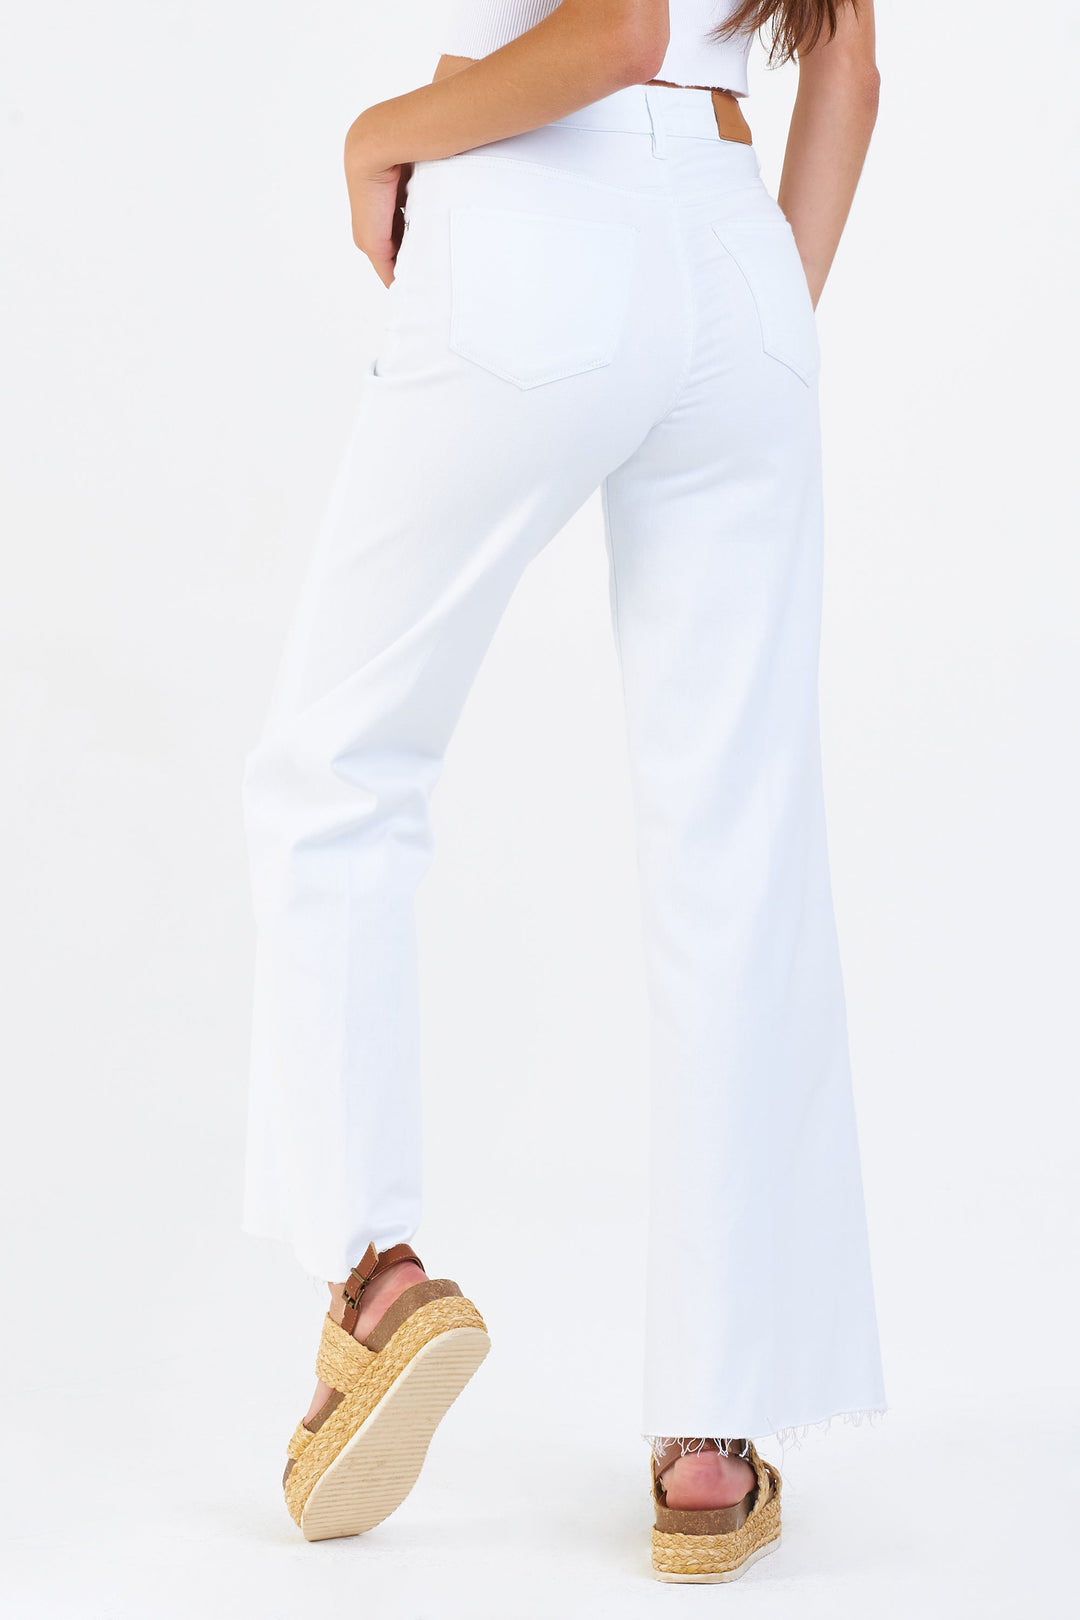 image of a female model wearing a FIONA SUPER HIGH RISE WIDE LEG JEANS OPTIC WHITE JEANS